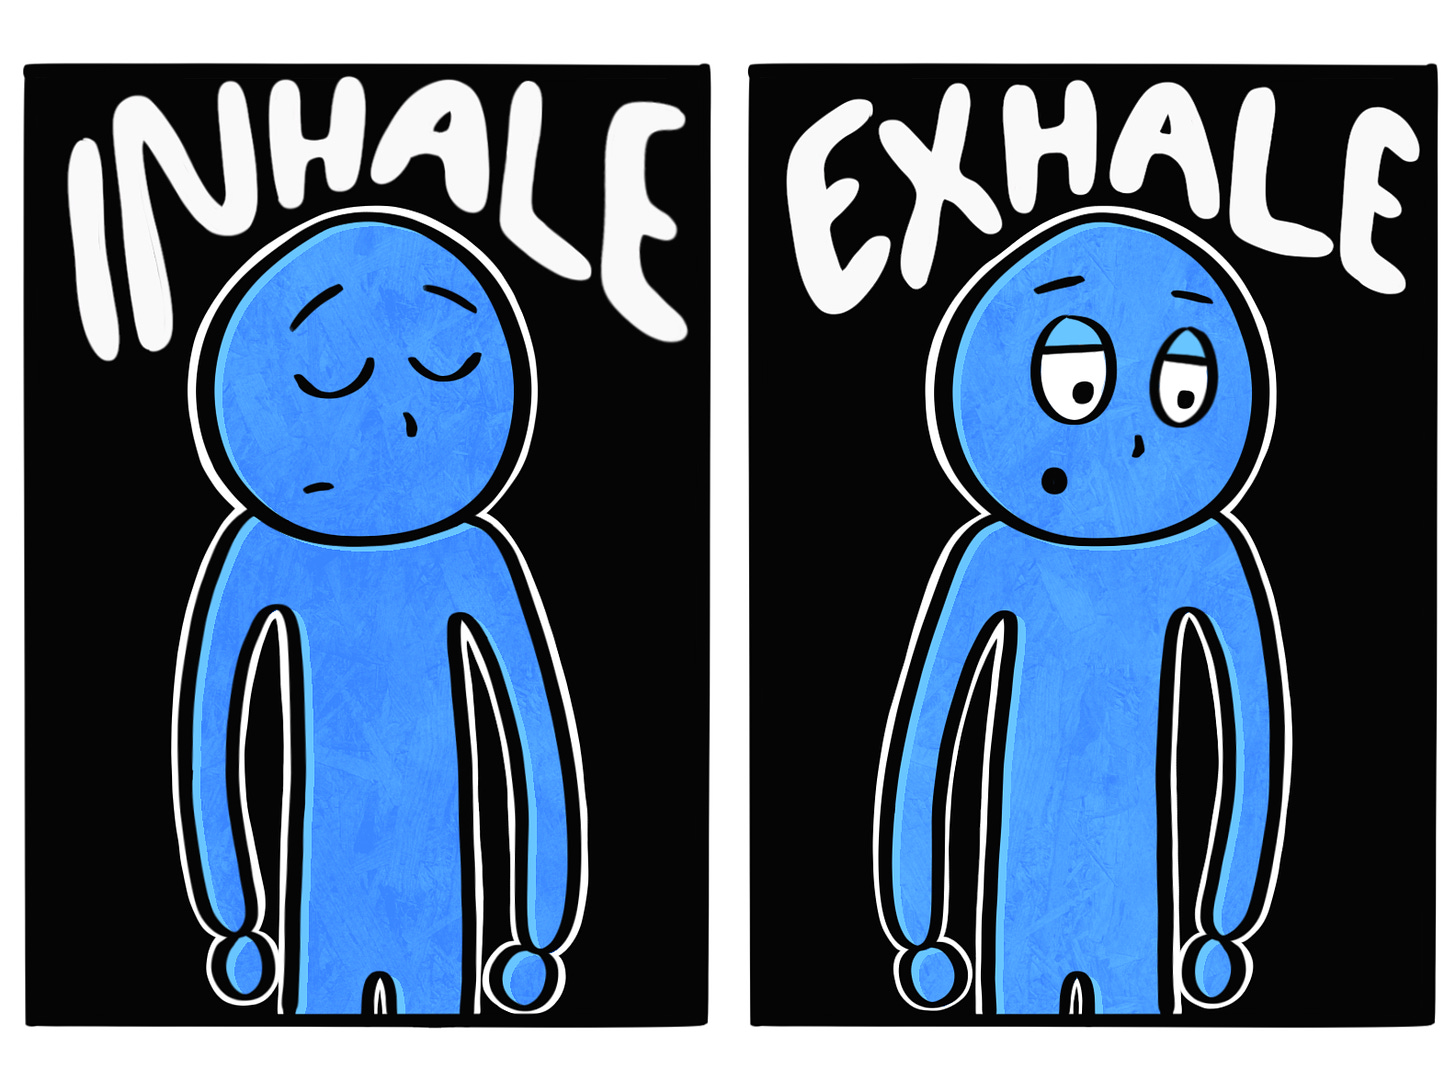 Image: Two panels, one of the Blue Person breathing in surrounded by the letters "inhale" and the second showing the Blue Person breathing out surrounded by the word "exhale."